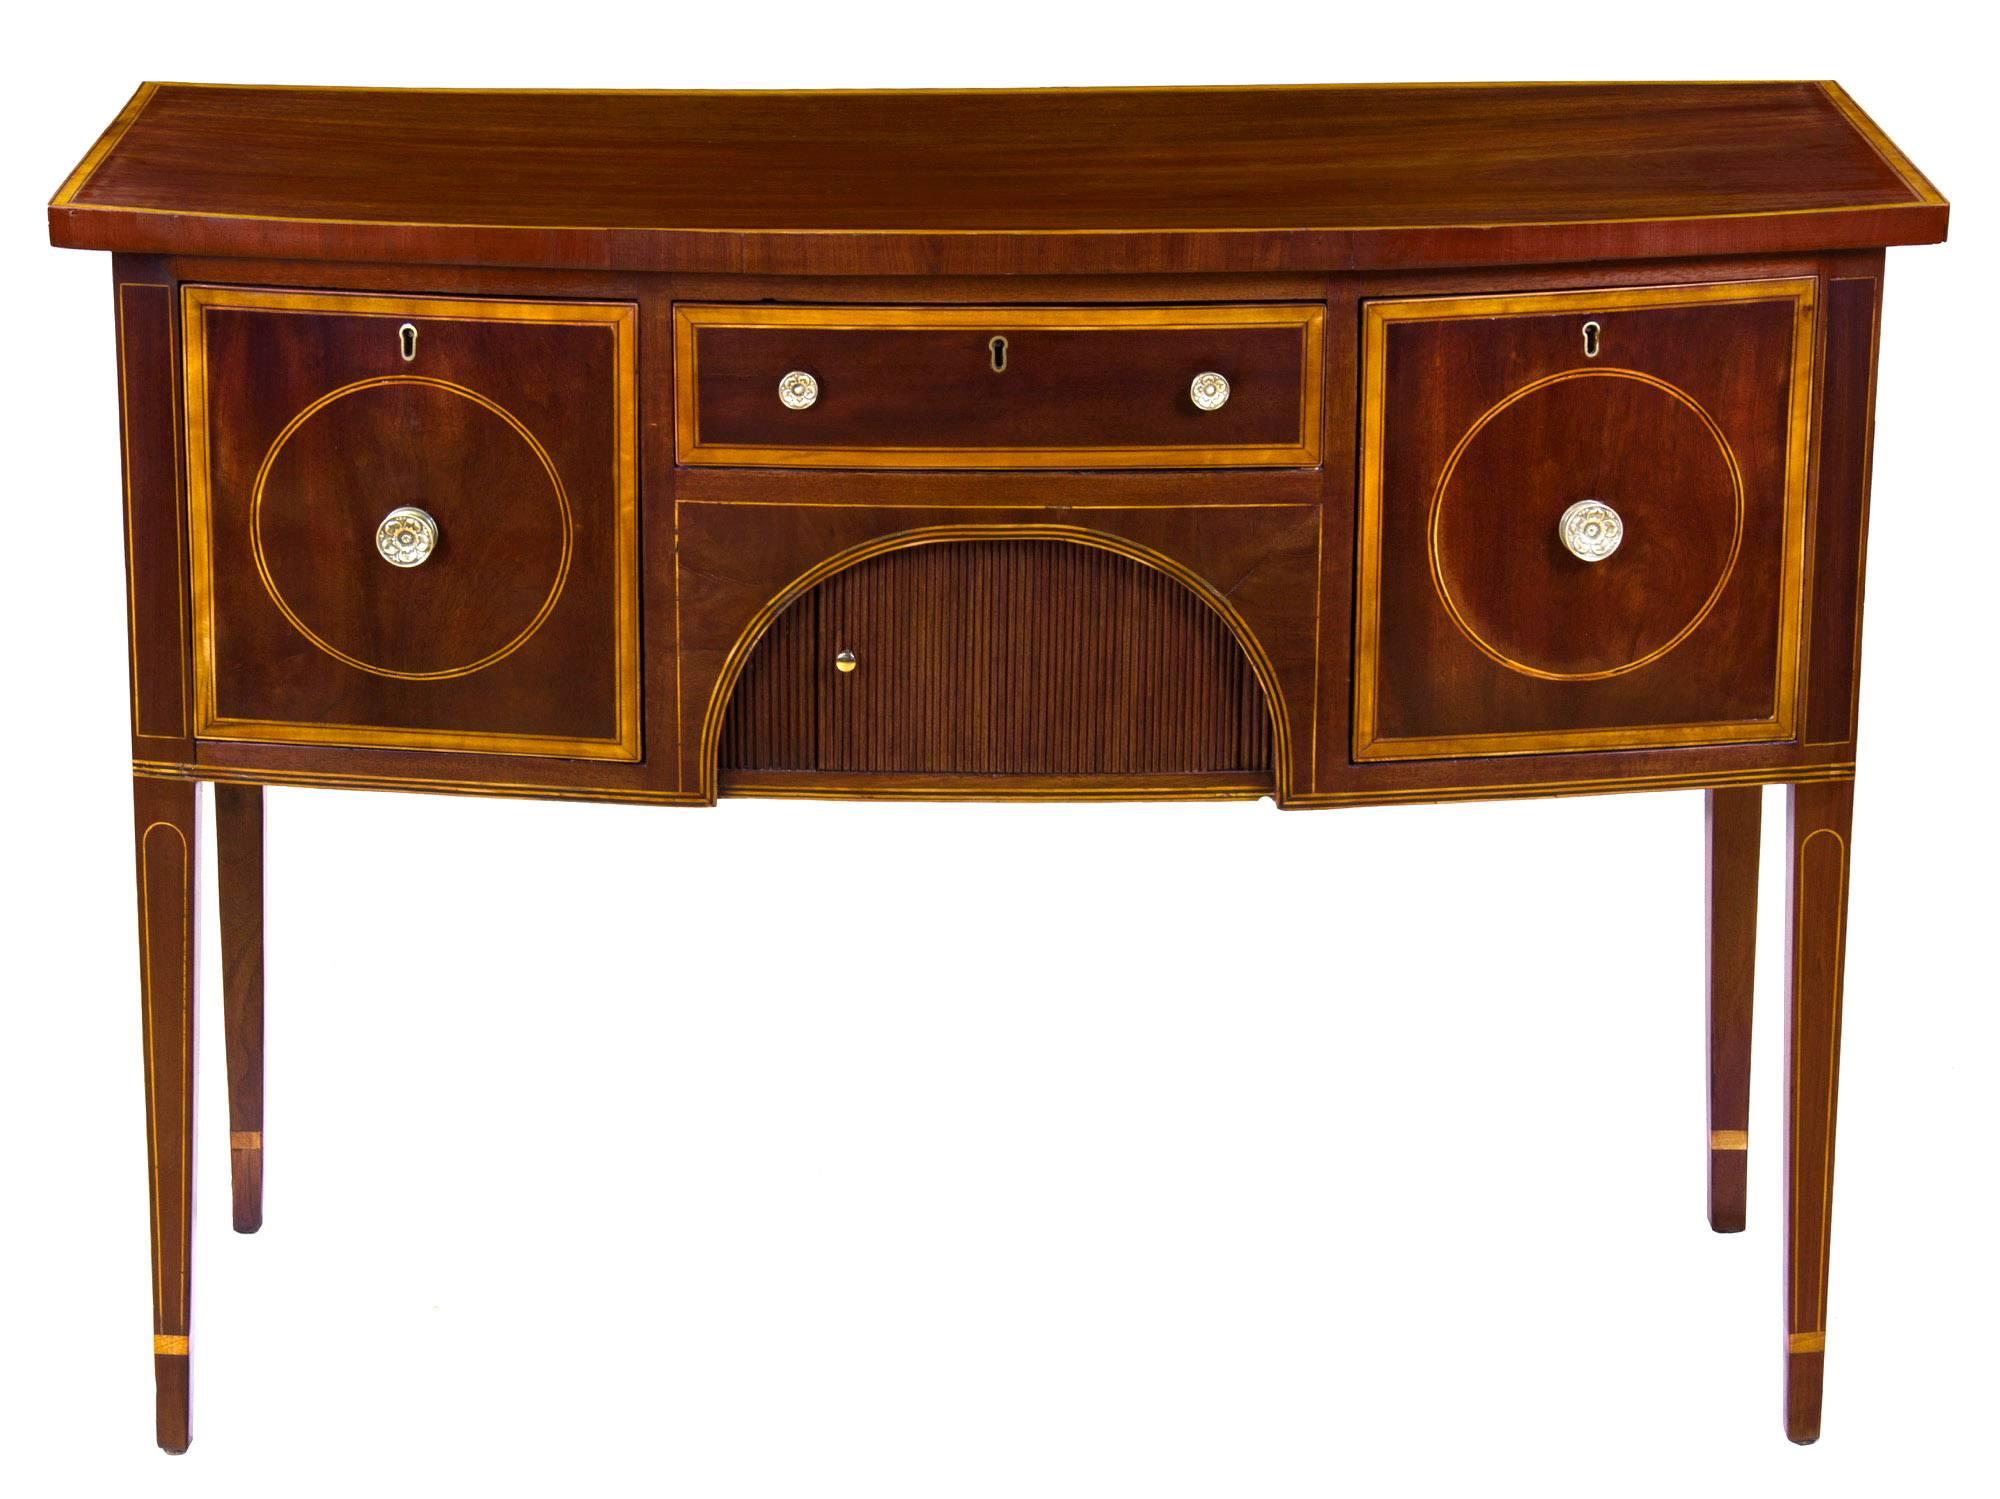 This server or sideboard is of a highly desirable small size. The top has a beautiful satinwood edge banding, which is further accented with ebony. The drawers are also of a beautifully figured mahogany which is embellished with ebony line inlay and